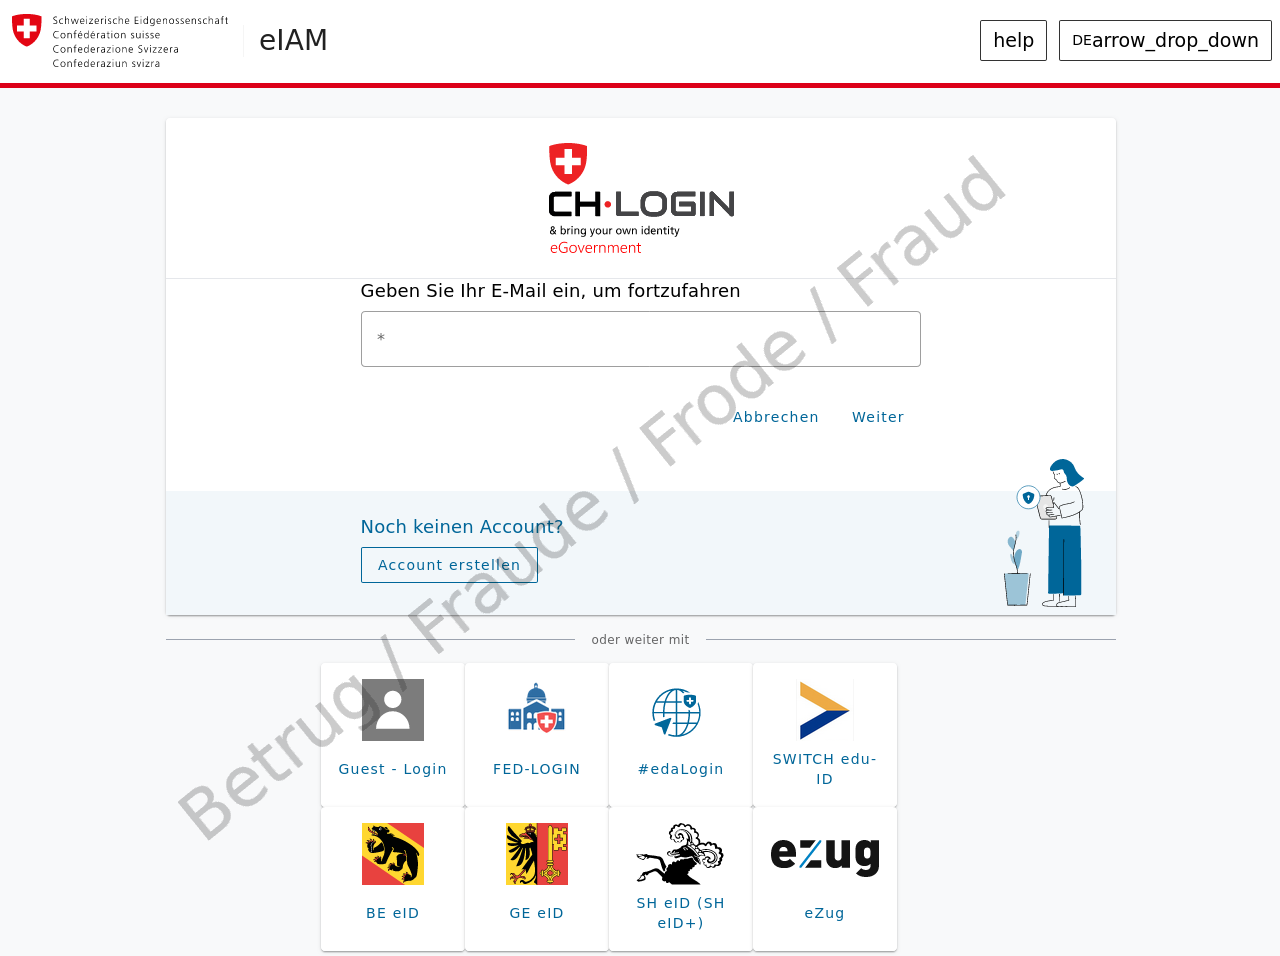 The link in the phishing email takes the victim to a fake eIAM login portal